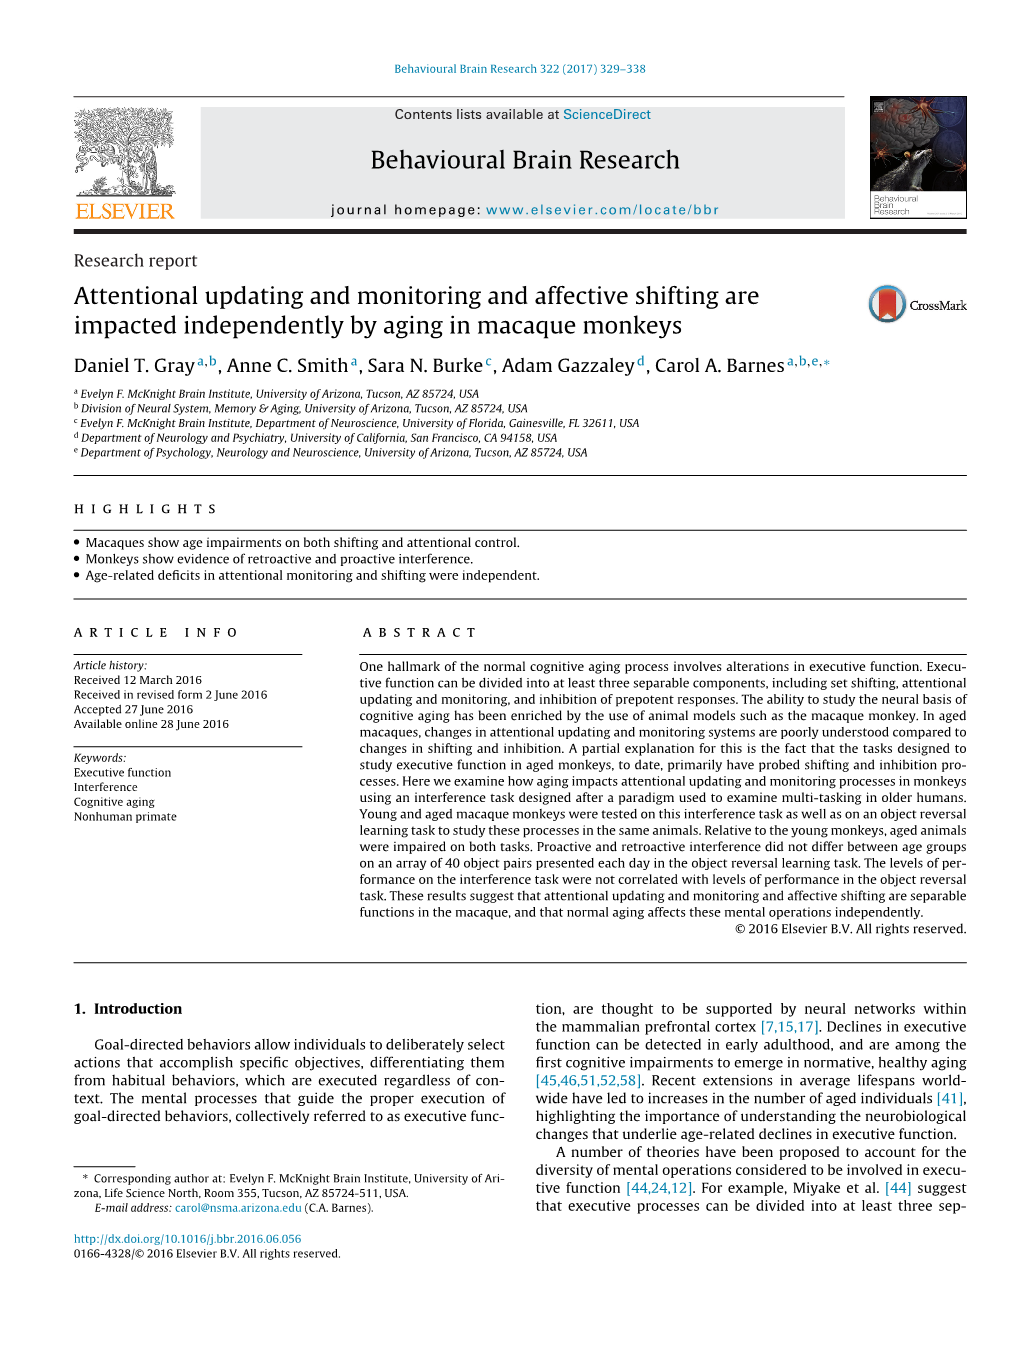 Attentional Updating and Monitoring and Affective Shifting Are